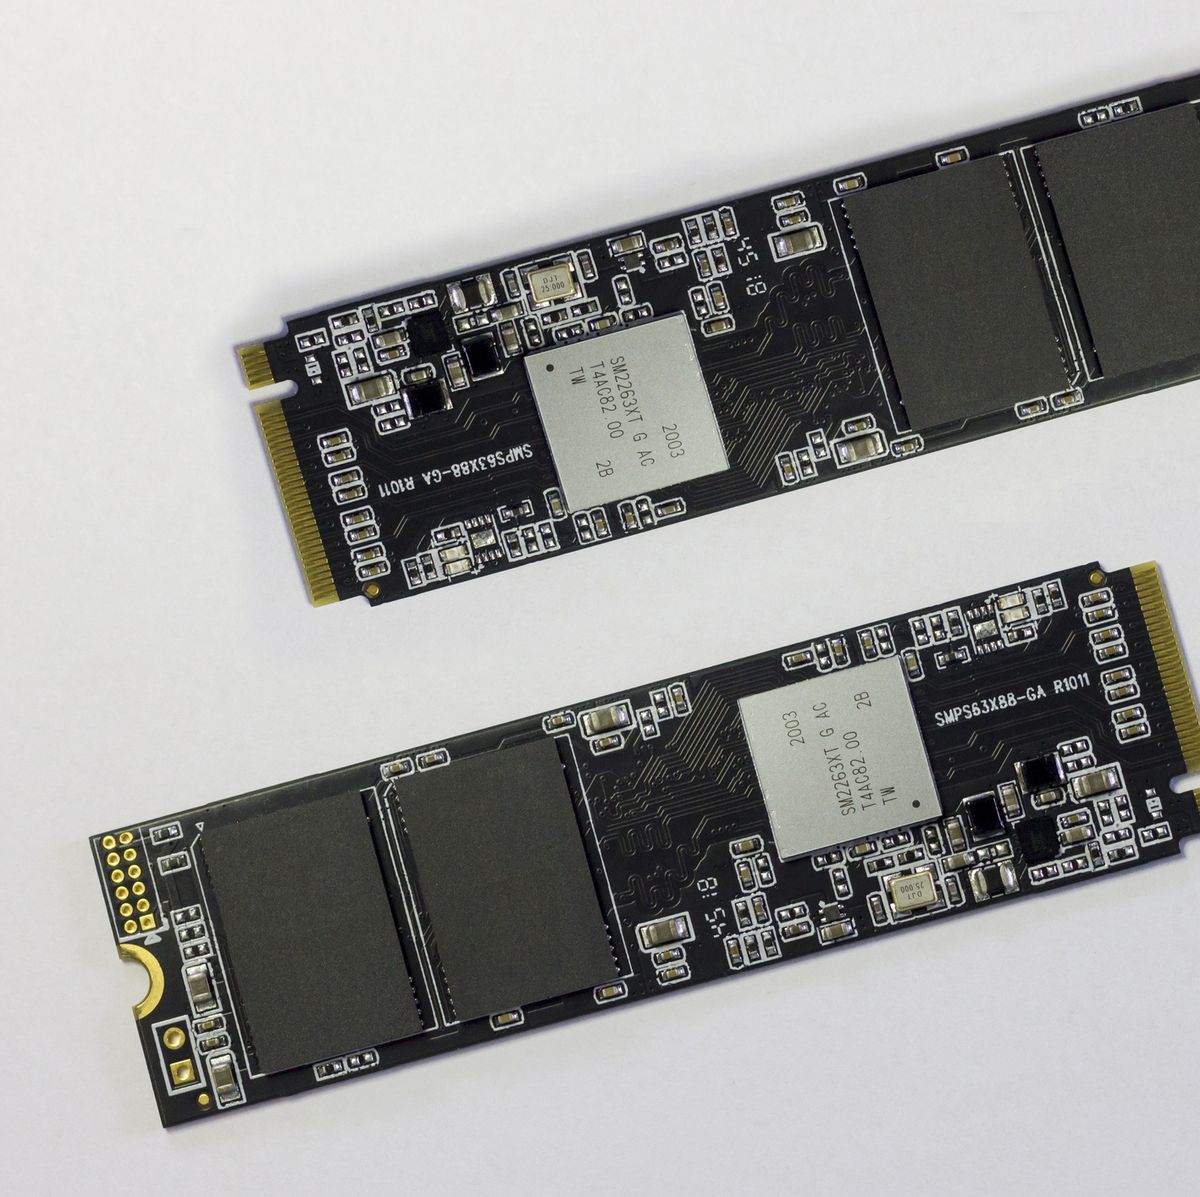 Hard Disk Ssd M2 On The Motherboard Background Stock Photo